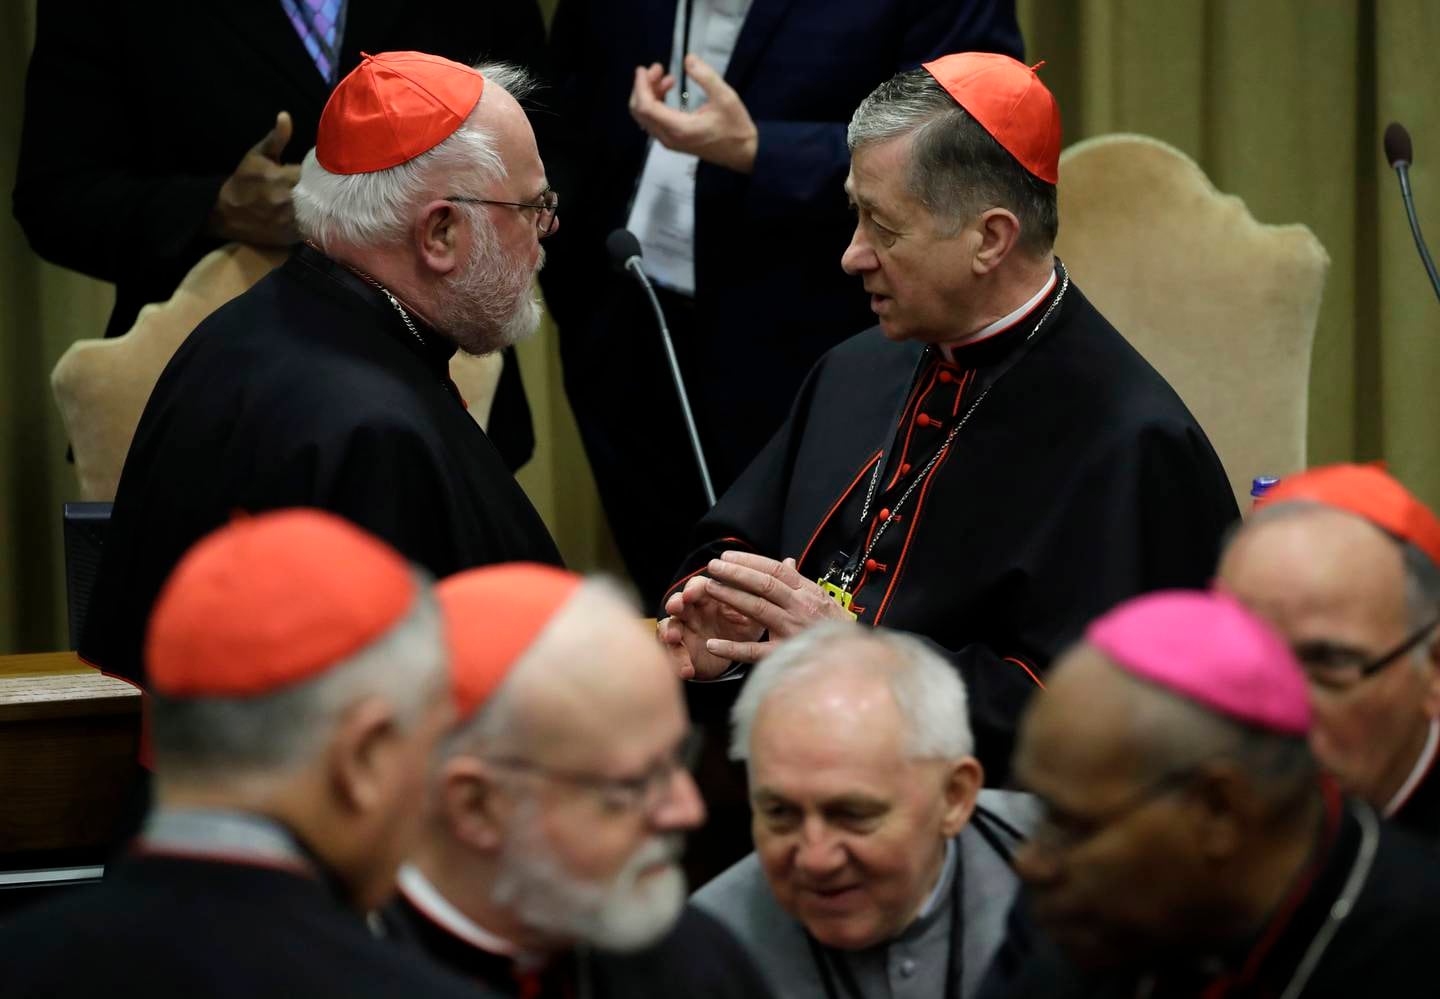 Chicago Archbishop Cardinal Blase J. Cupich, right, talks with Cardinal Reinhard Marx, as they wait for the arrival of Pope Francis for the third day of a Vatican's conference on dealing with sex abuse by priests, at the Vatican, Saturday, Feb. 23, 2019. (AP Photo/Alessandra Tarantino, Pool)